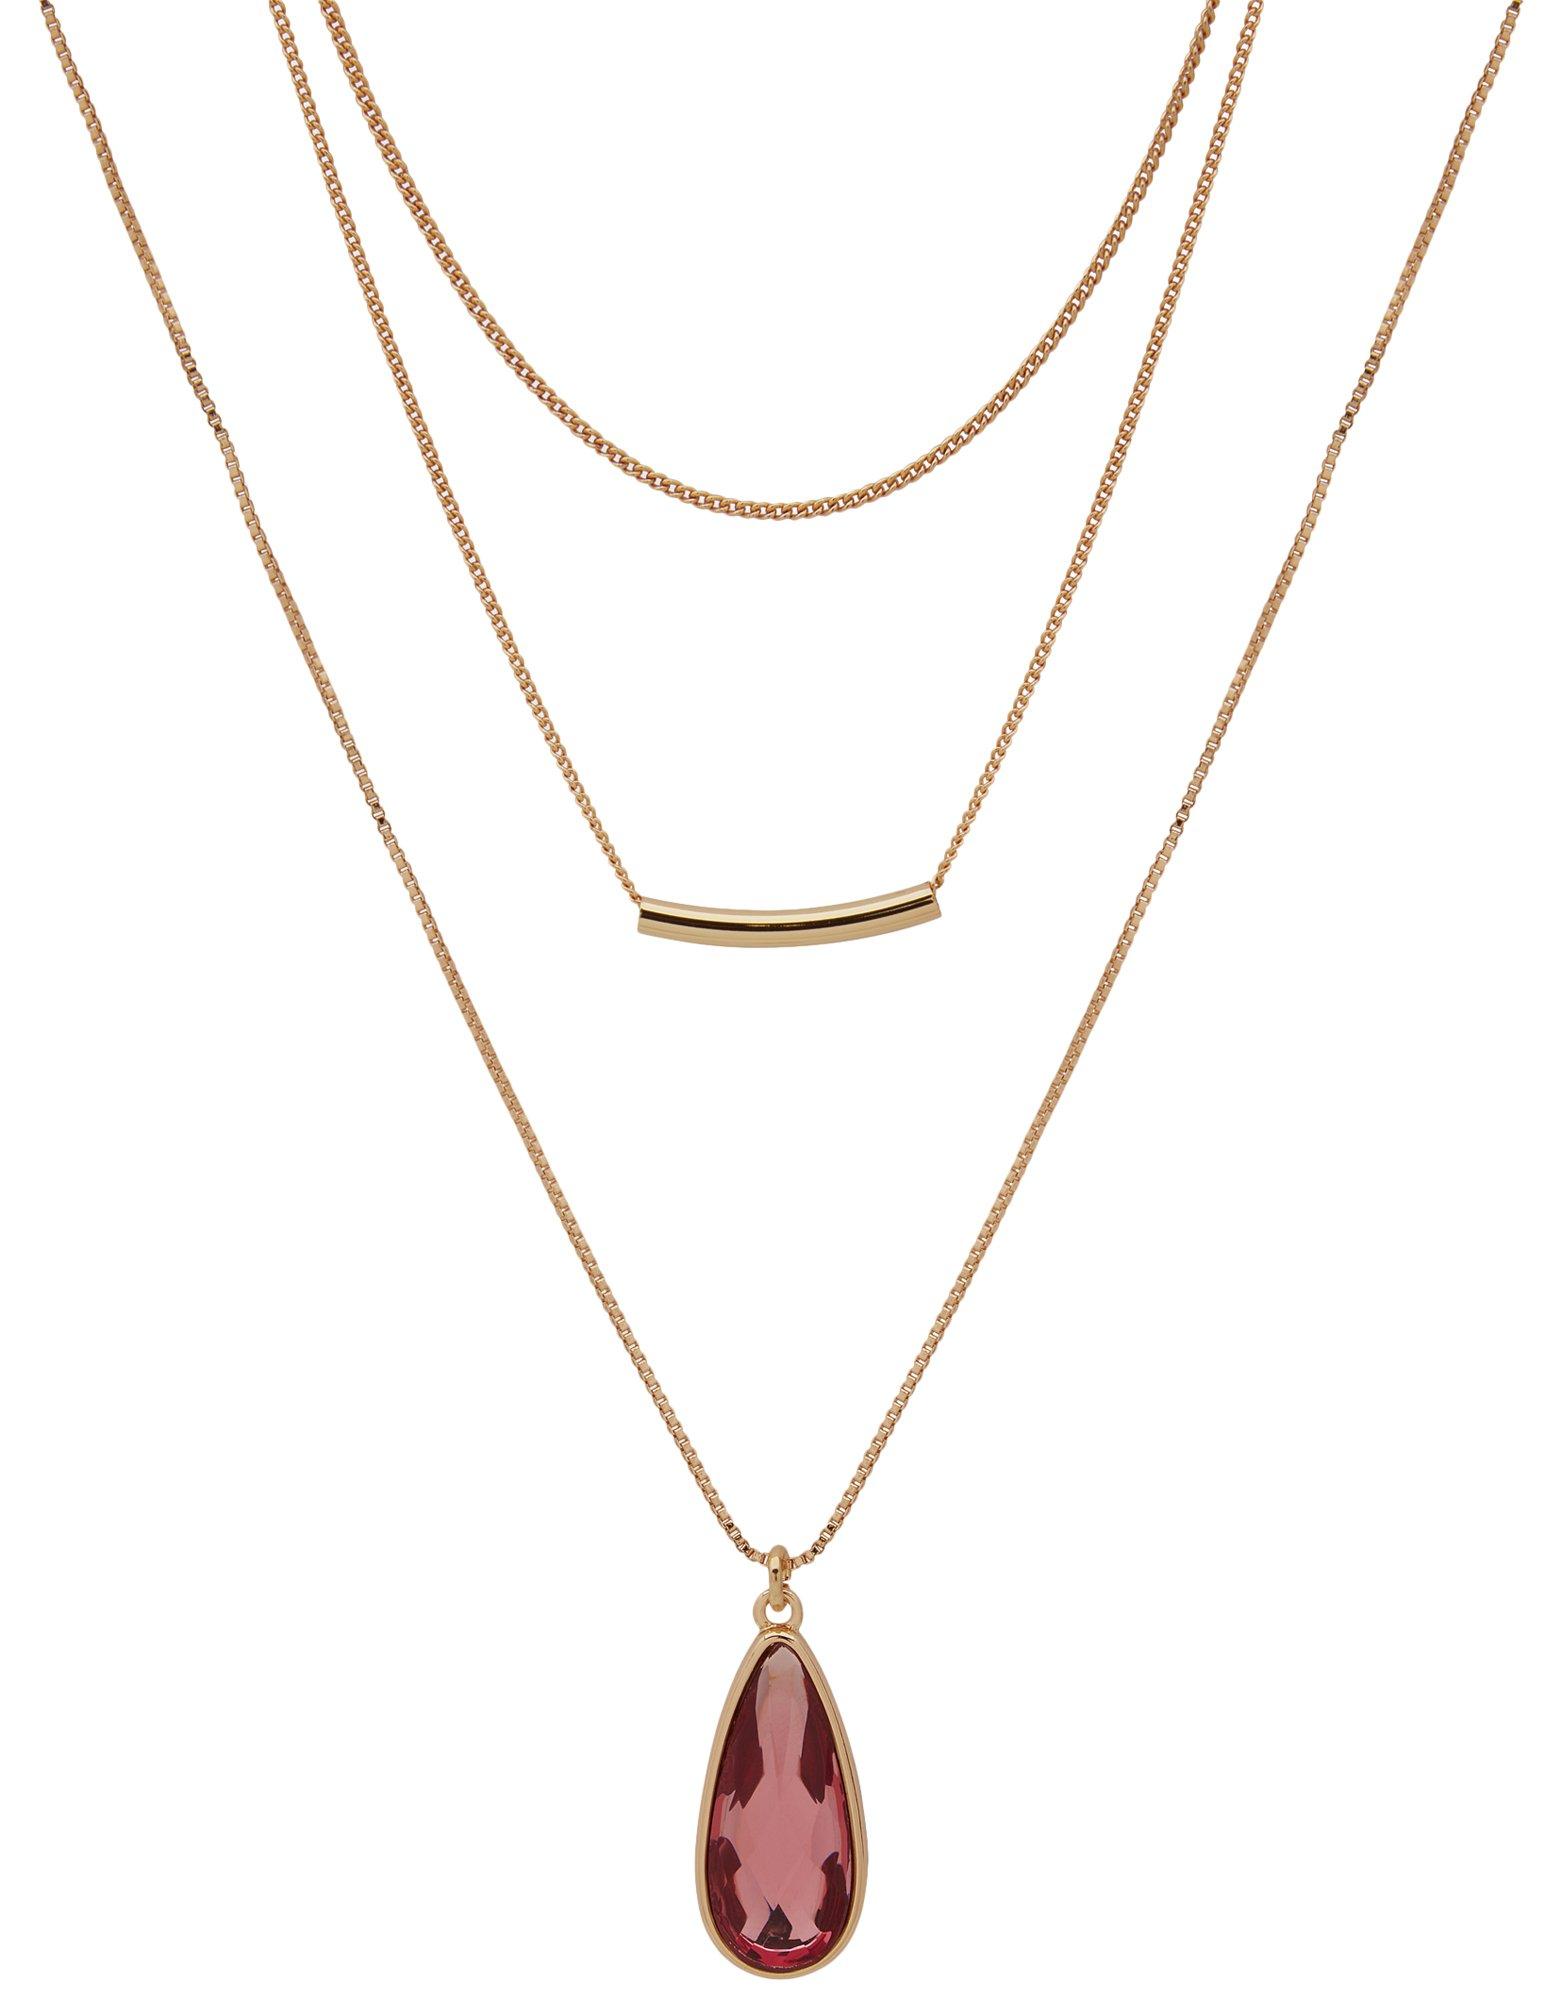 3-Row 16 In. Cabochon Teardrop Chain Necklace